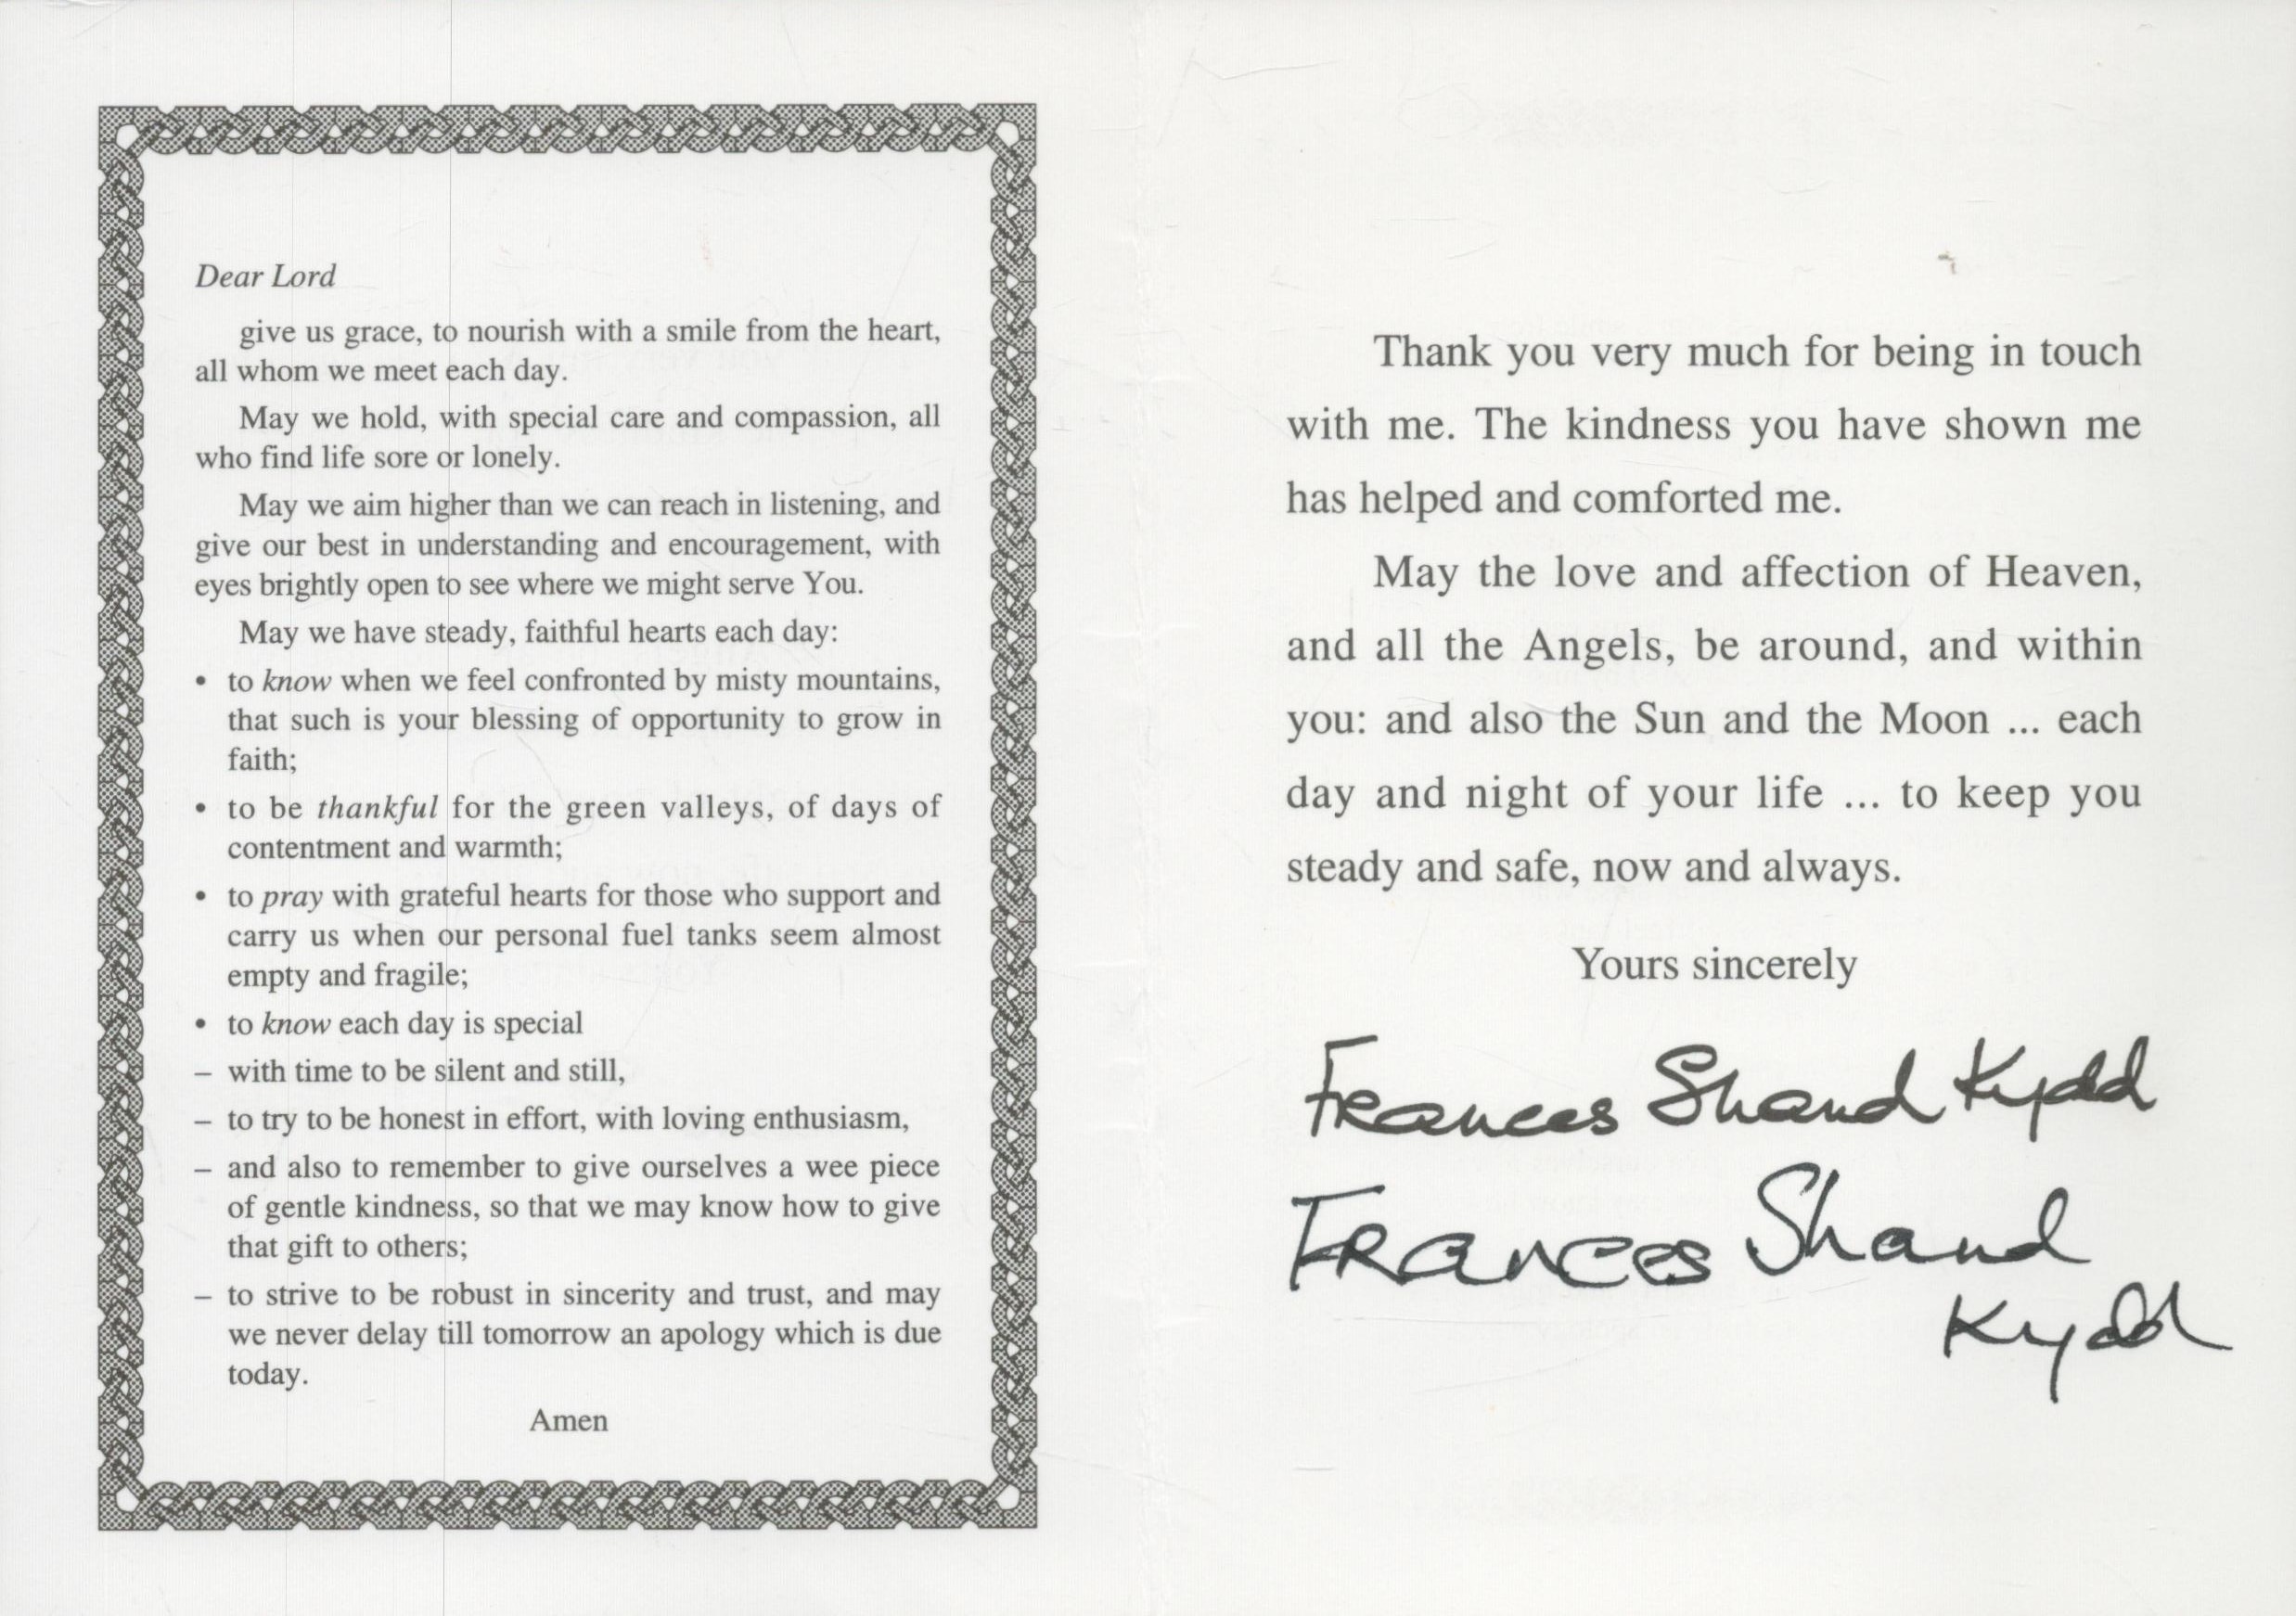 Frances Shand Kydd signed Diana Princess of Wales 1961-1997 Prayer card. Good Condition. All